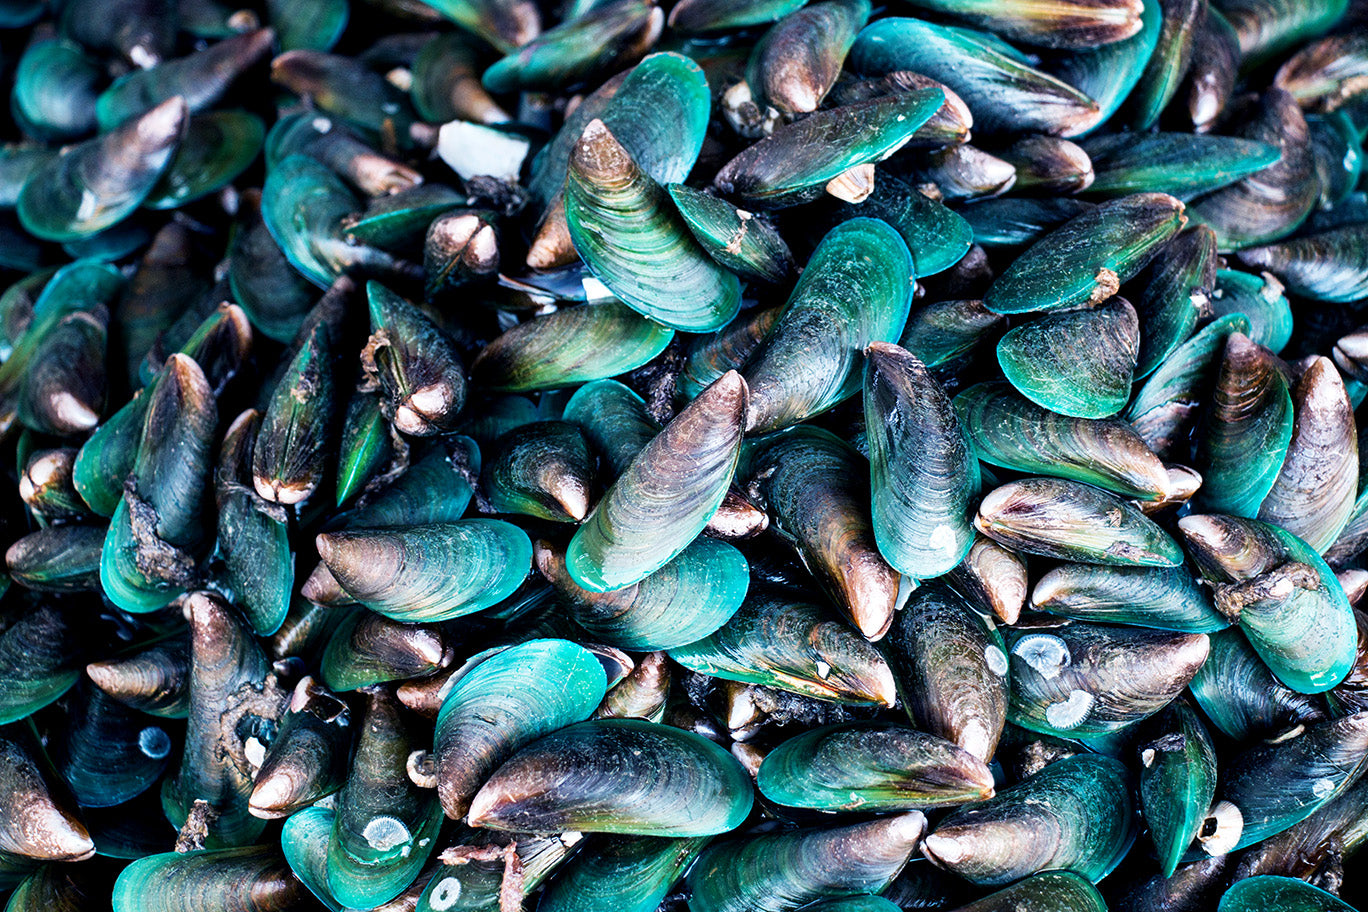 A pile of green-lipped mussels.